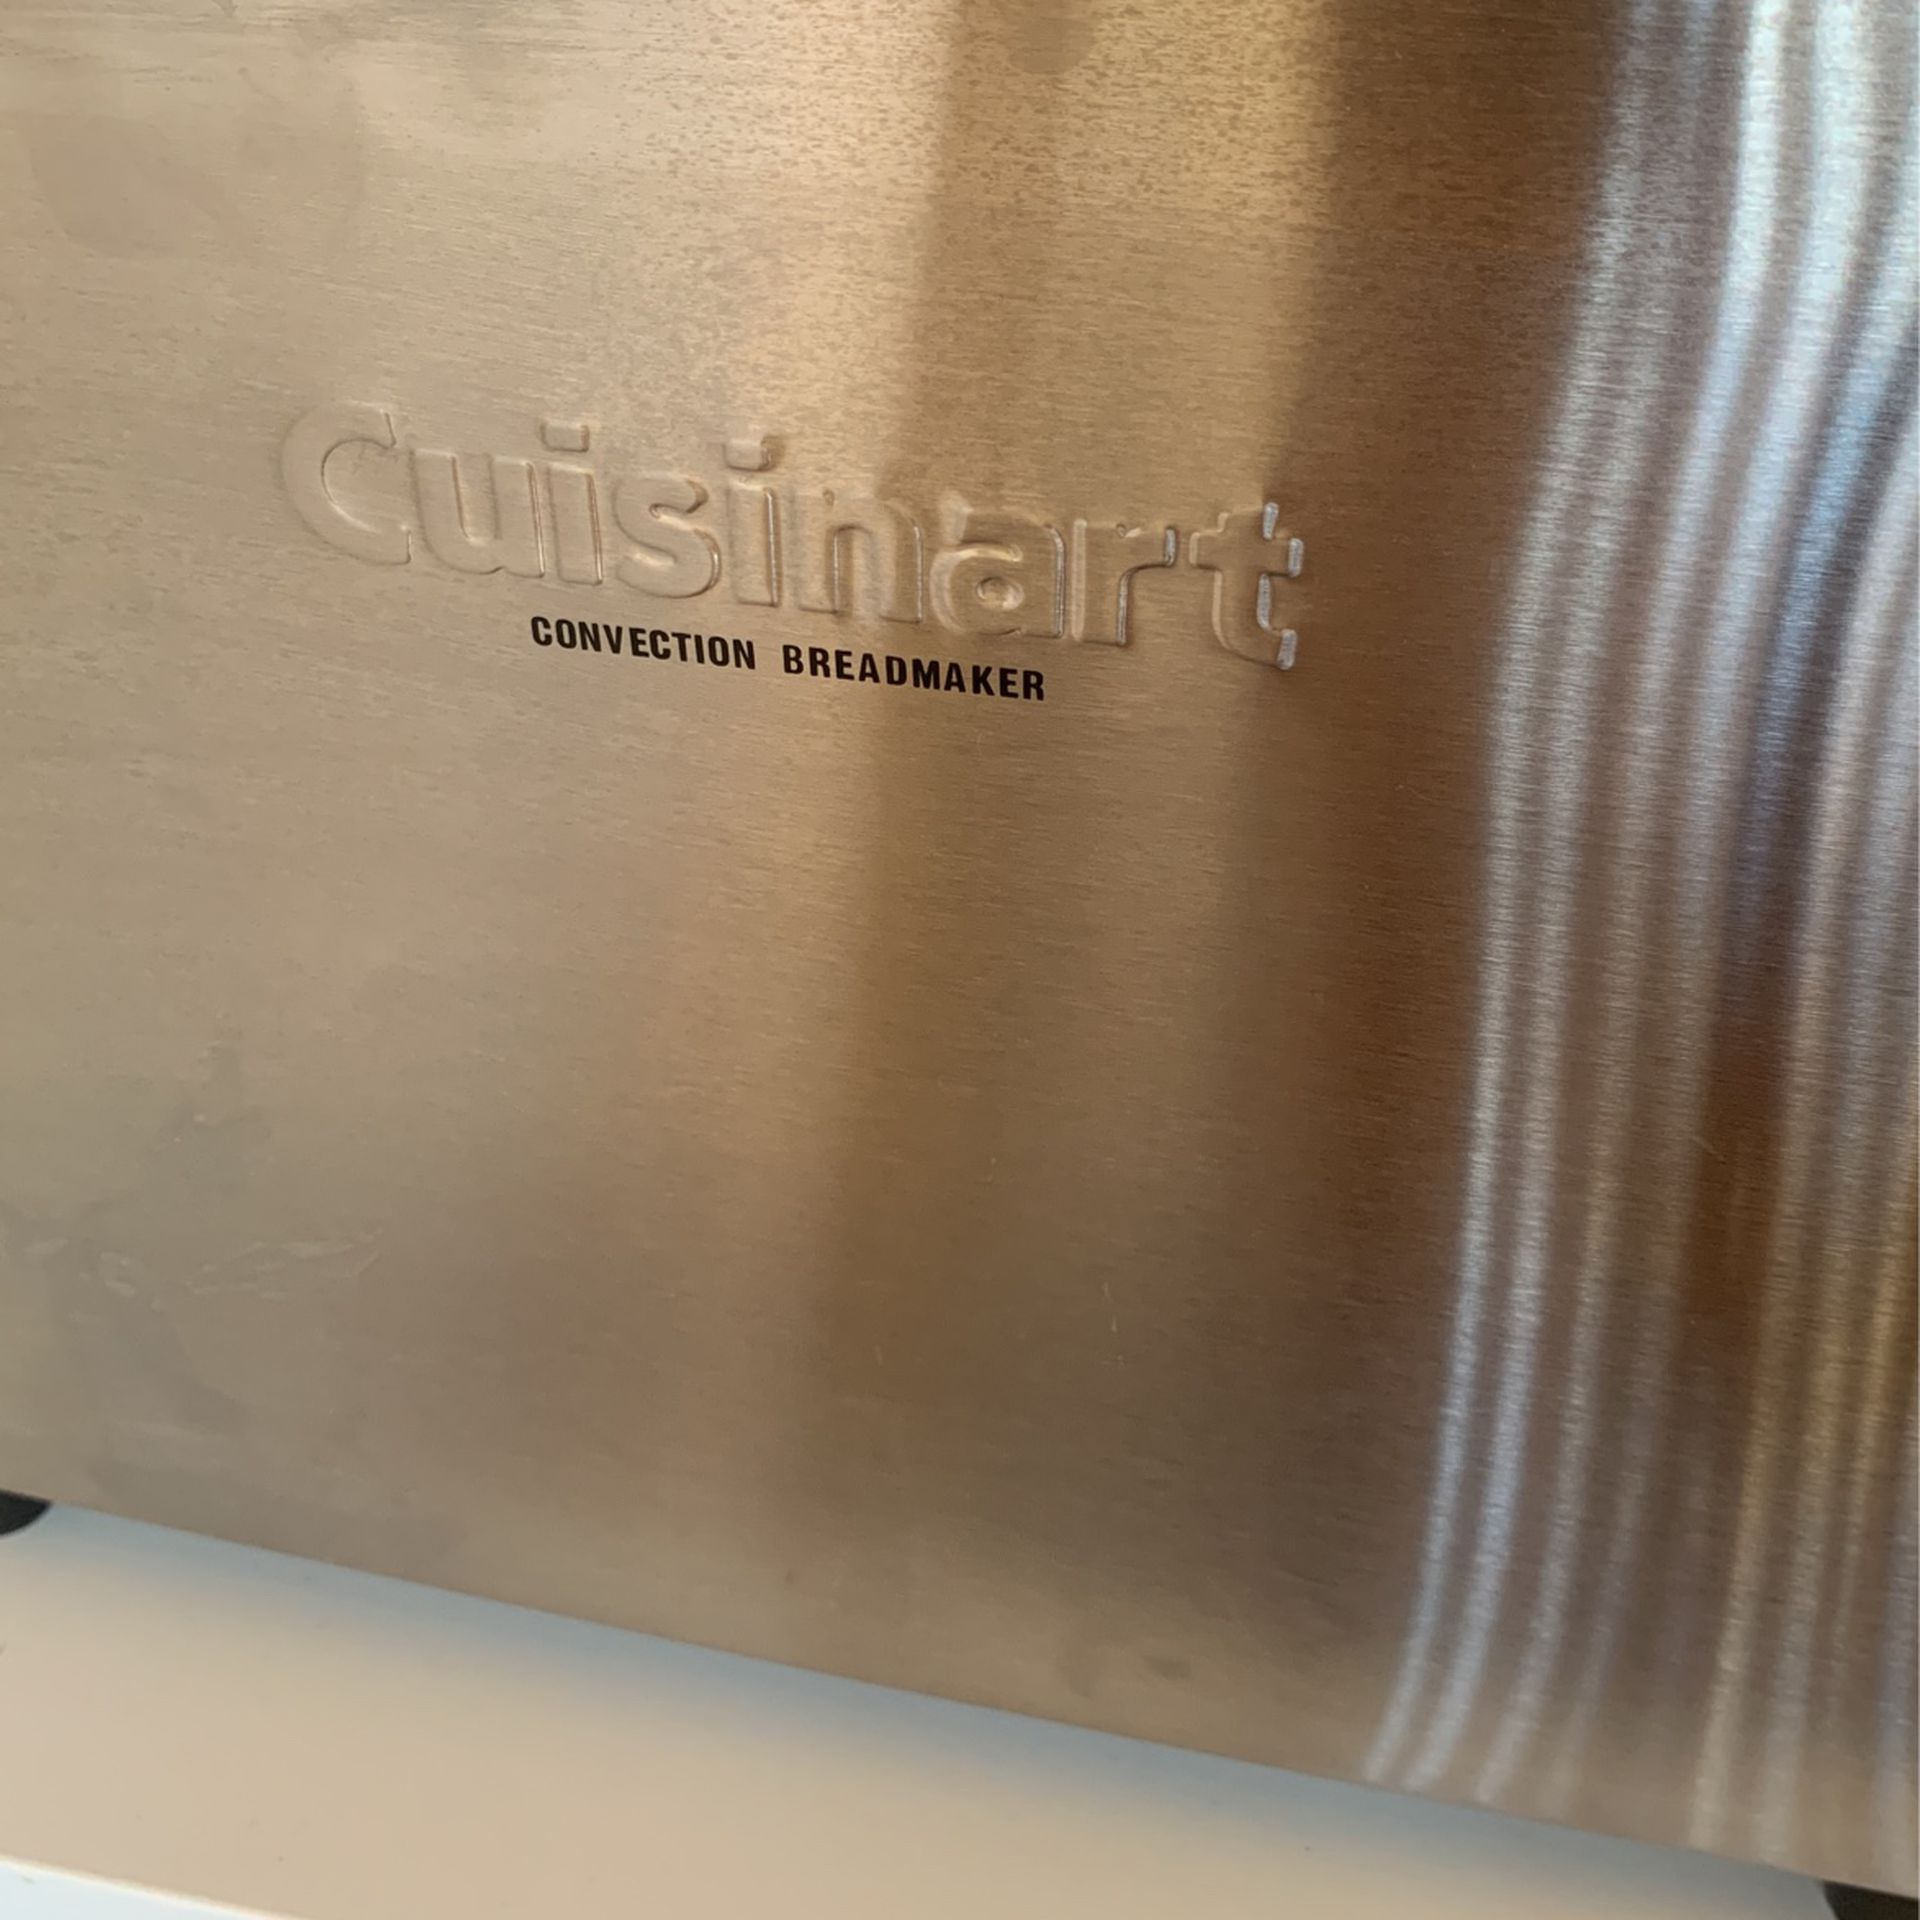 New Without Box Cusinart Convection Bread Mark